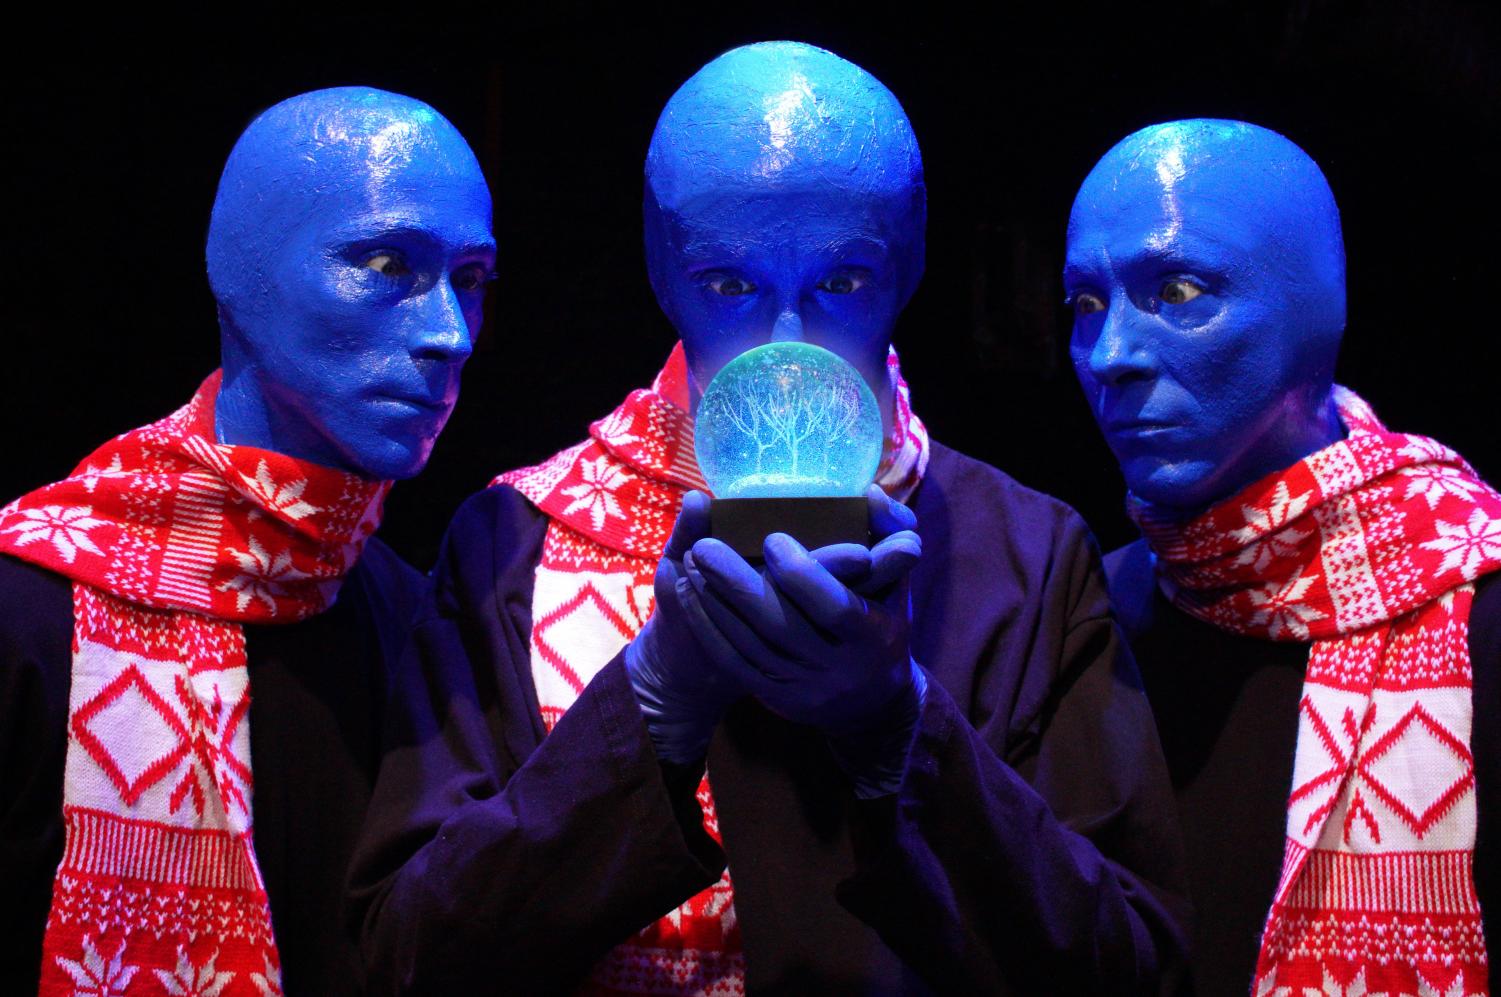 Blue Man Group members use a snow globe during their show.